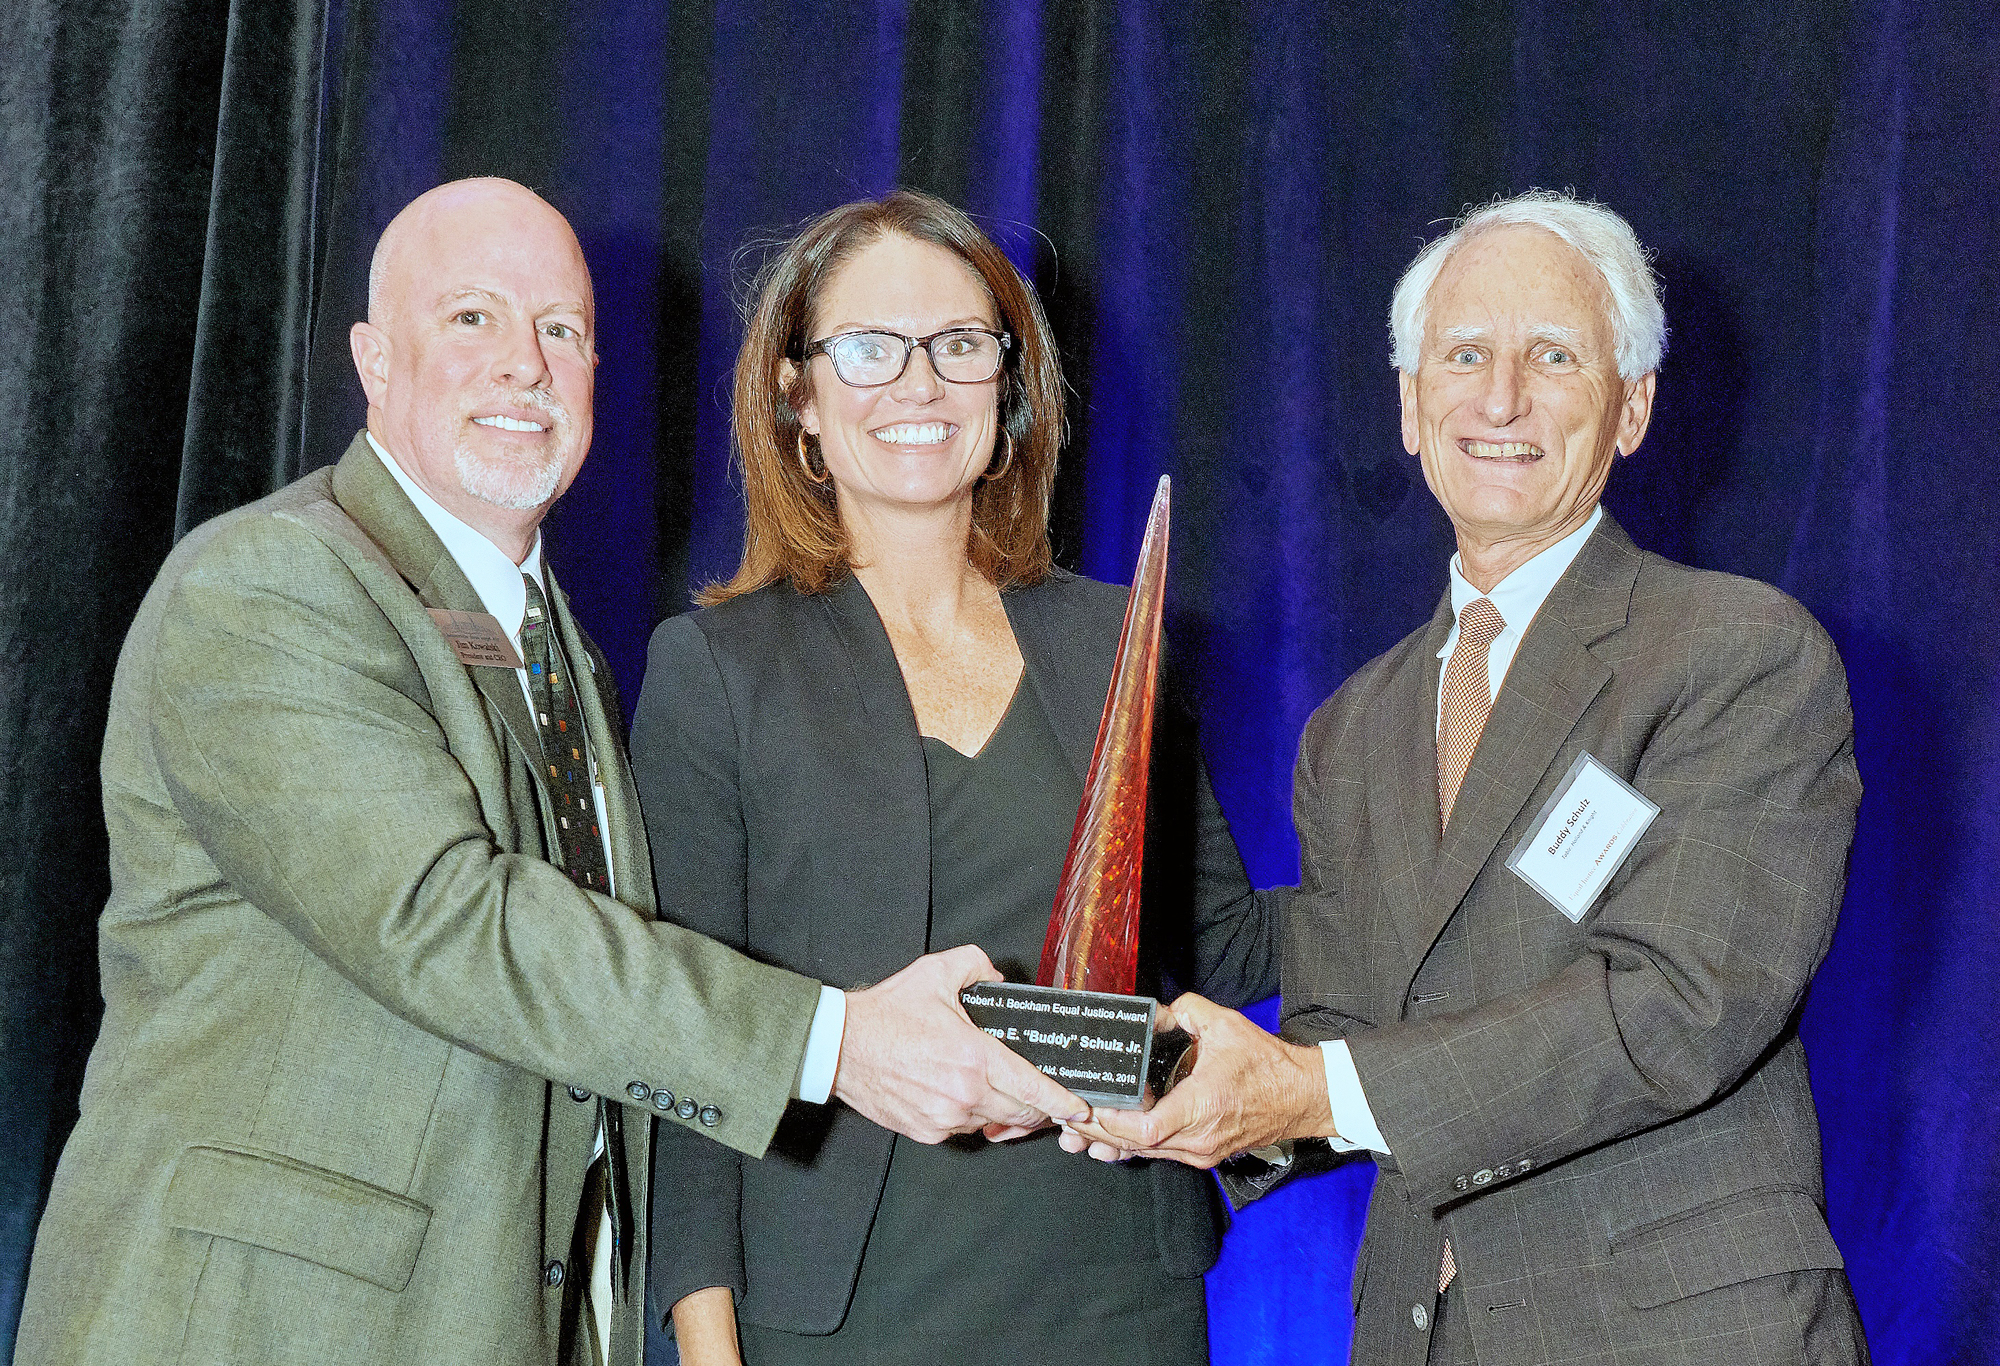 Jacksonville Area Legal Aid Executive Director Jim Kowalski, left, with State Attorney Melissa Nelson and Equal Justice Award recipient Buddy Schulz.